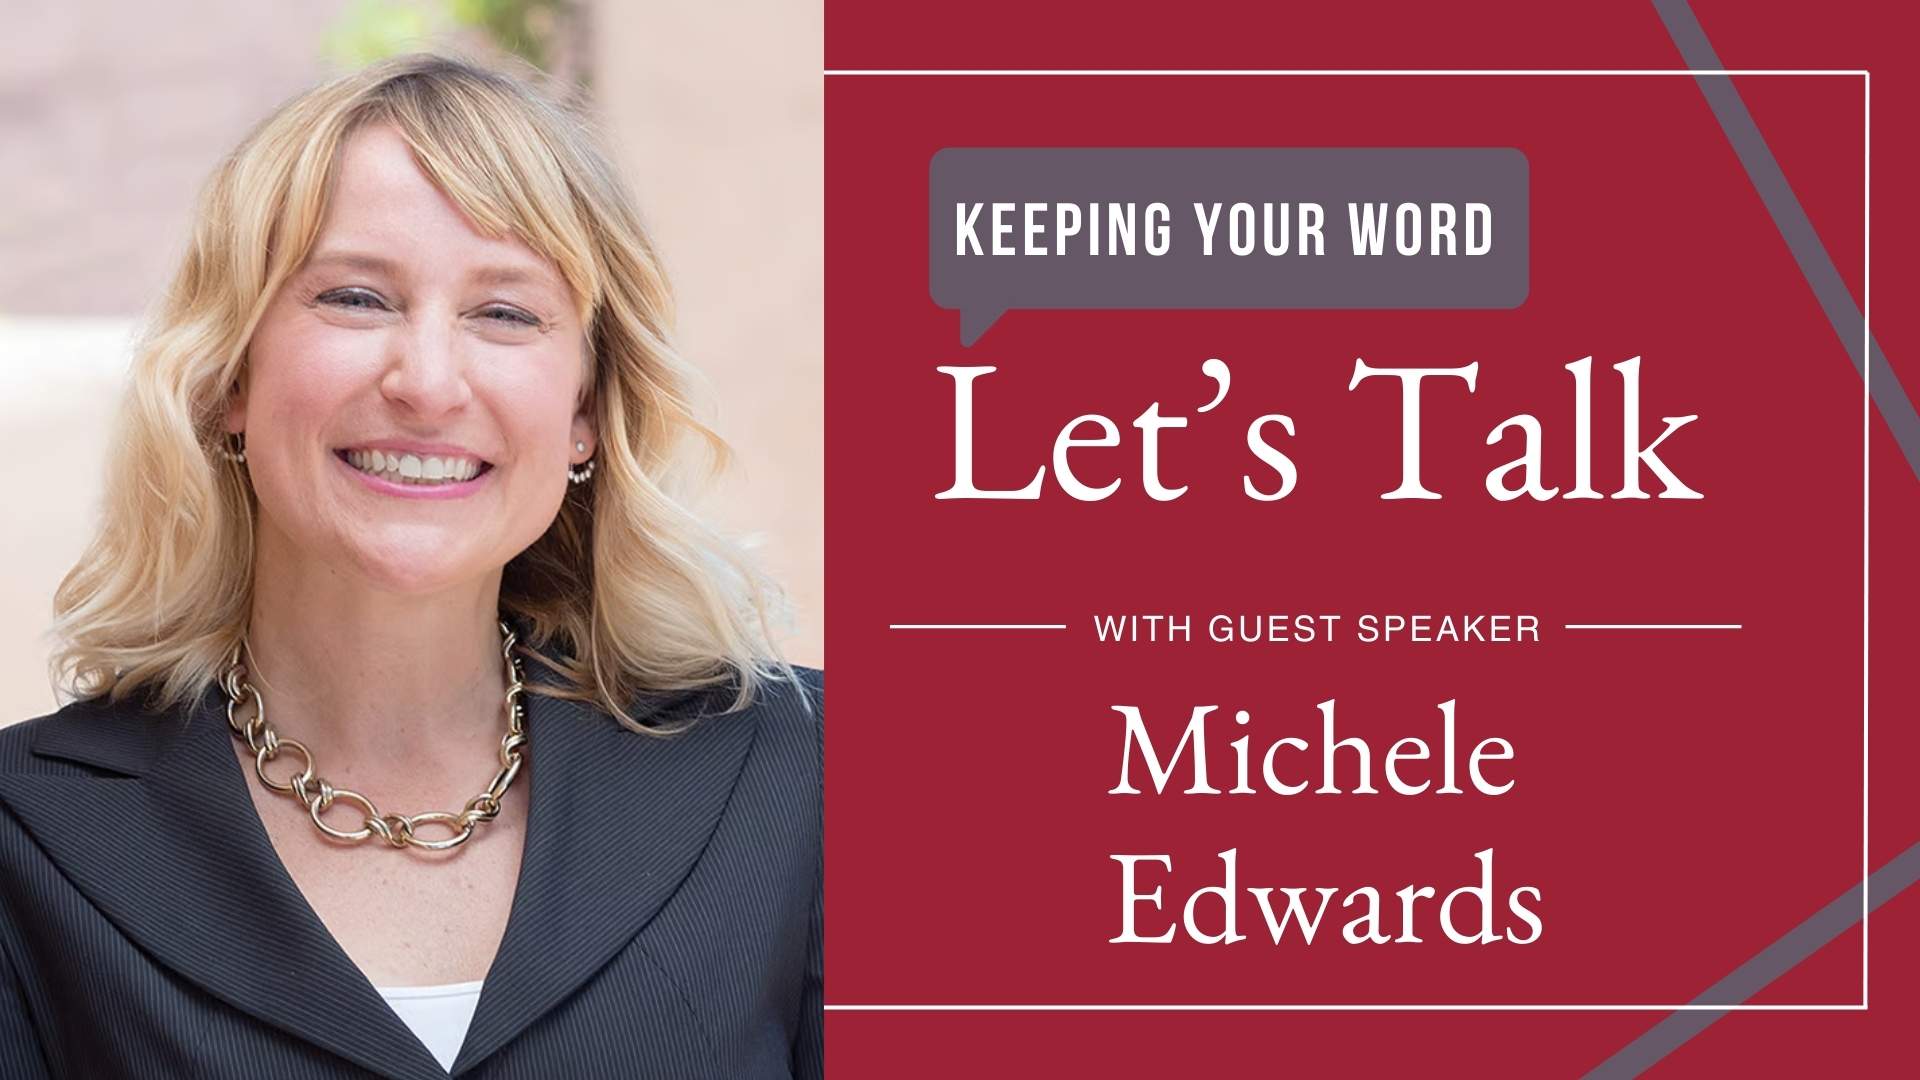 Michele Edwards - Let's Talk about Keeping Your Word guest speaker